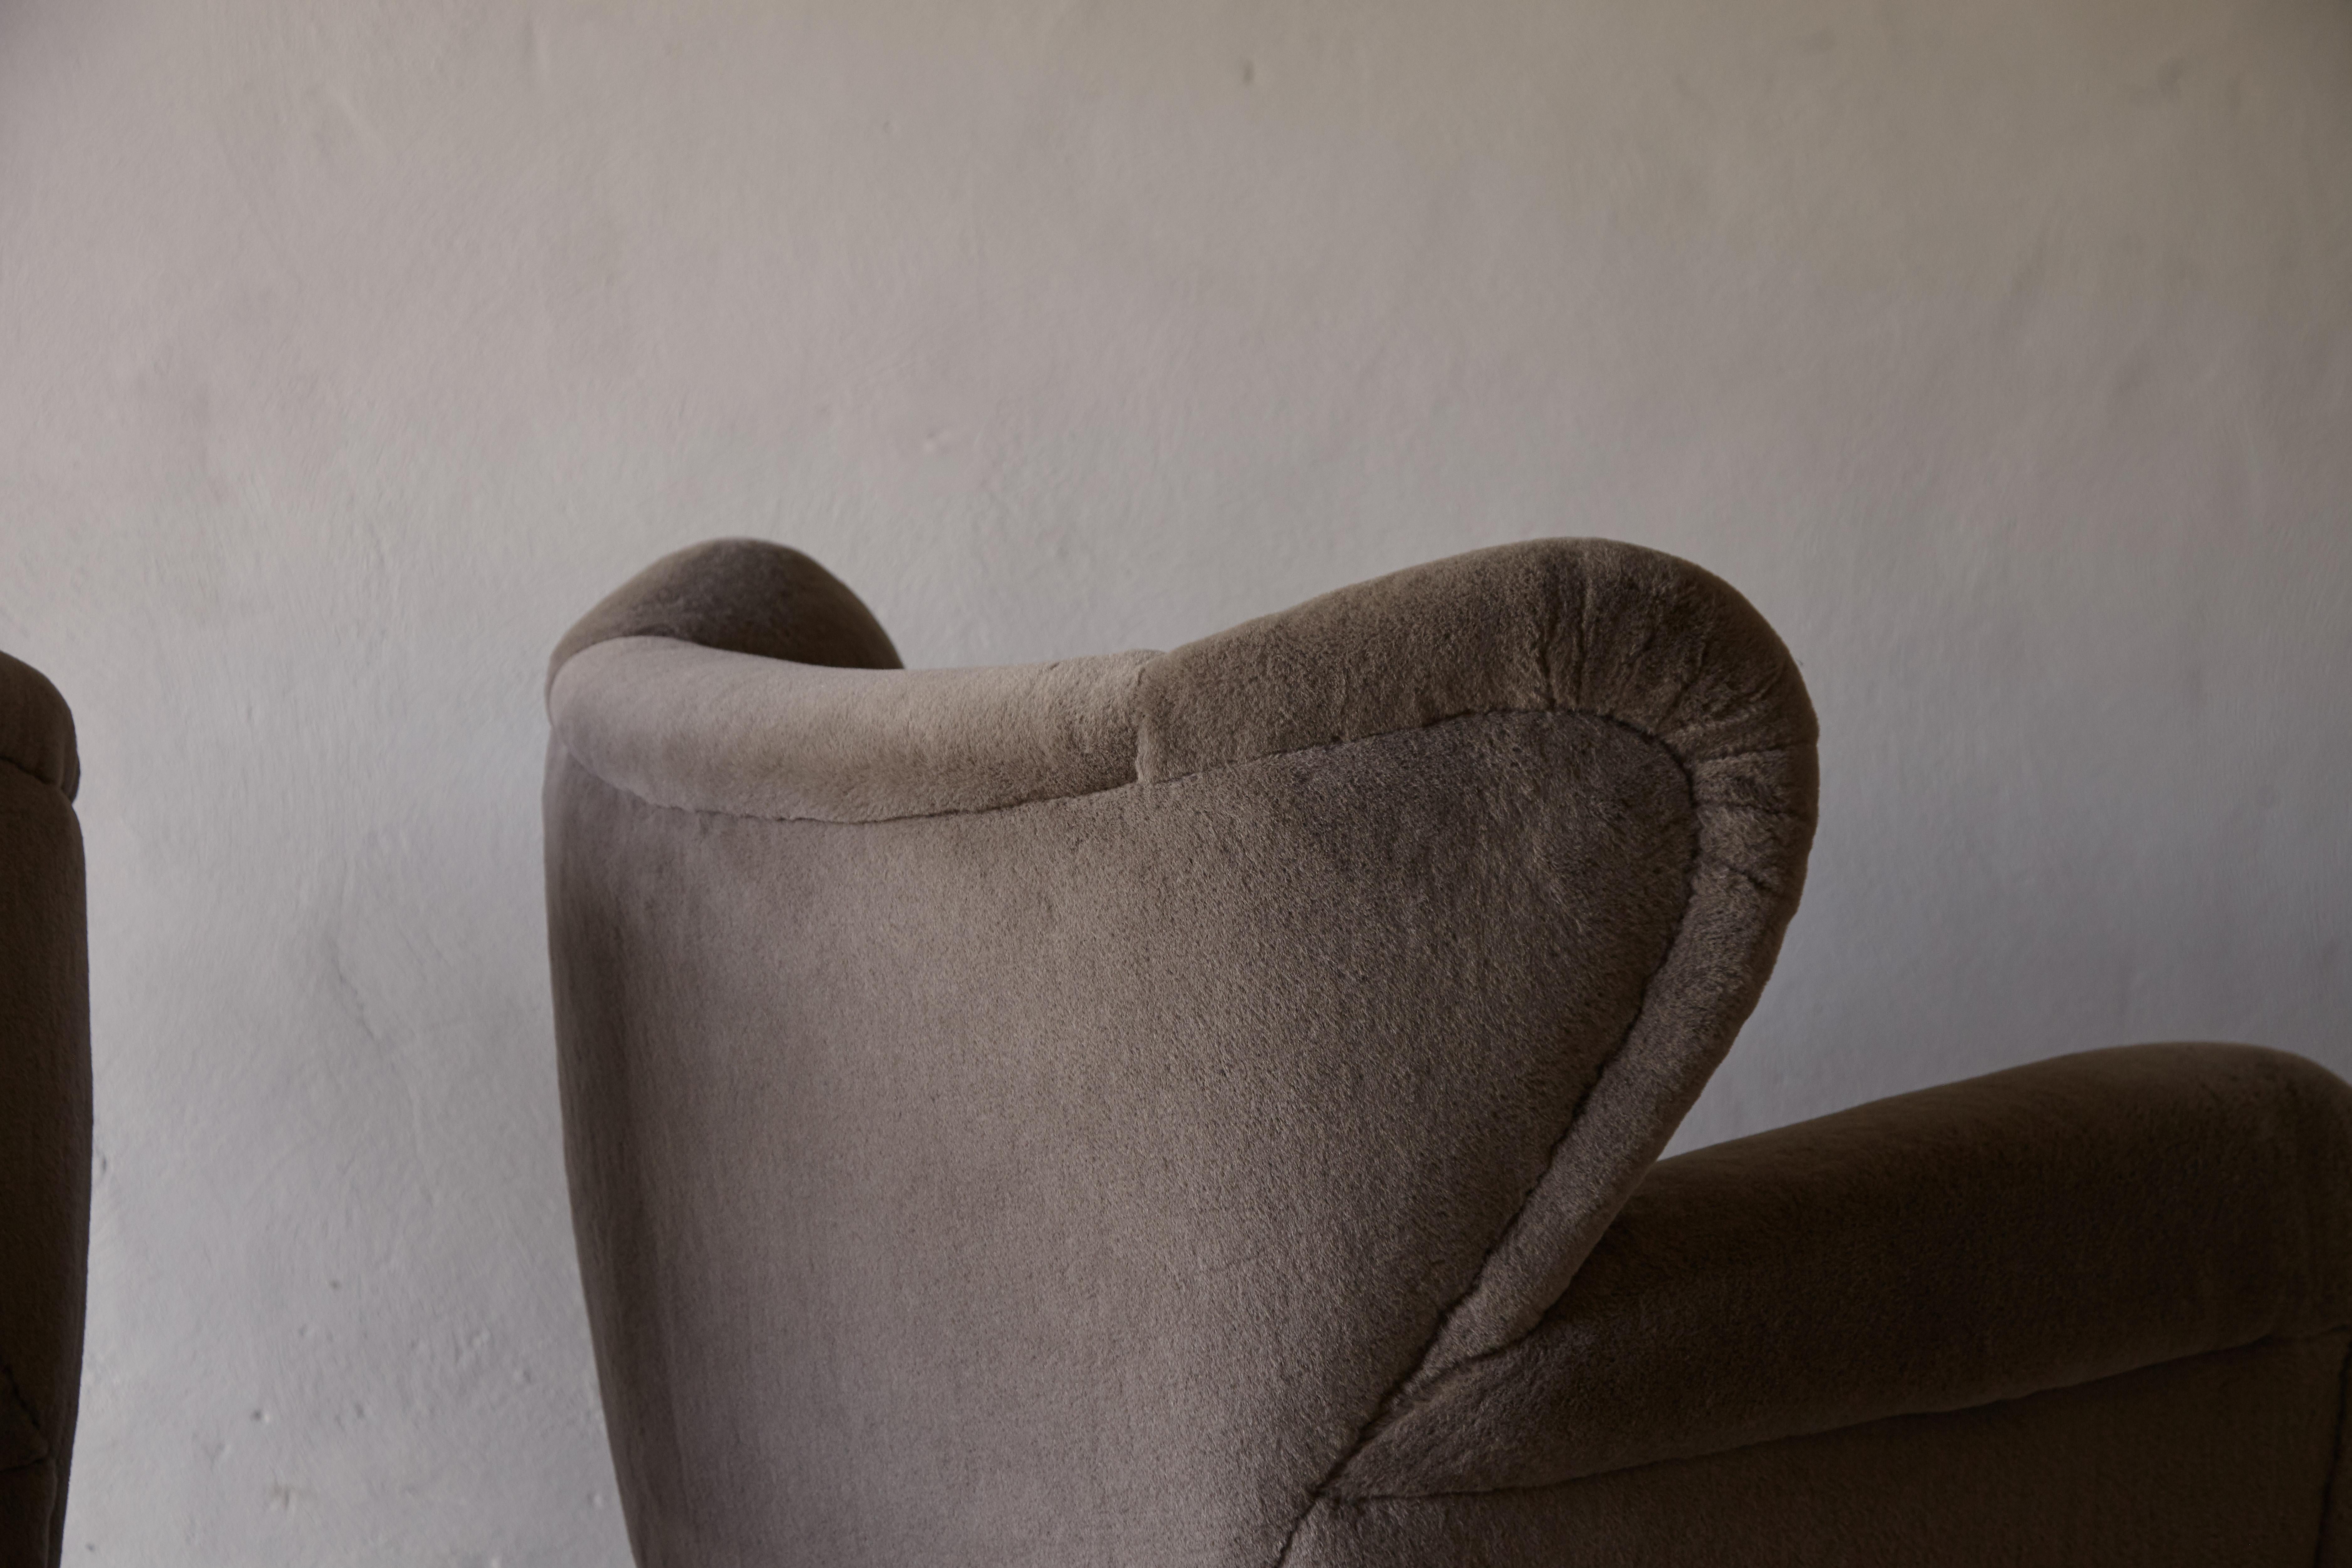 Superb Pair of Armchairs, Newly Upholstered in Pure Alpaca, Denmark, 1940s / 50s 5